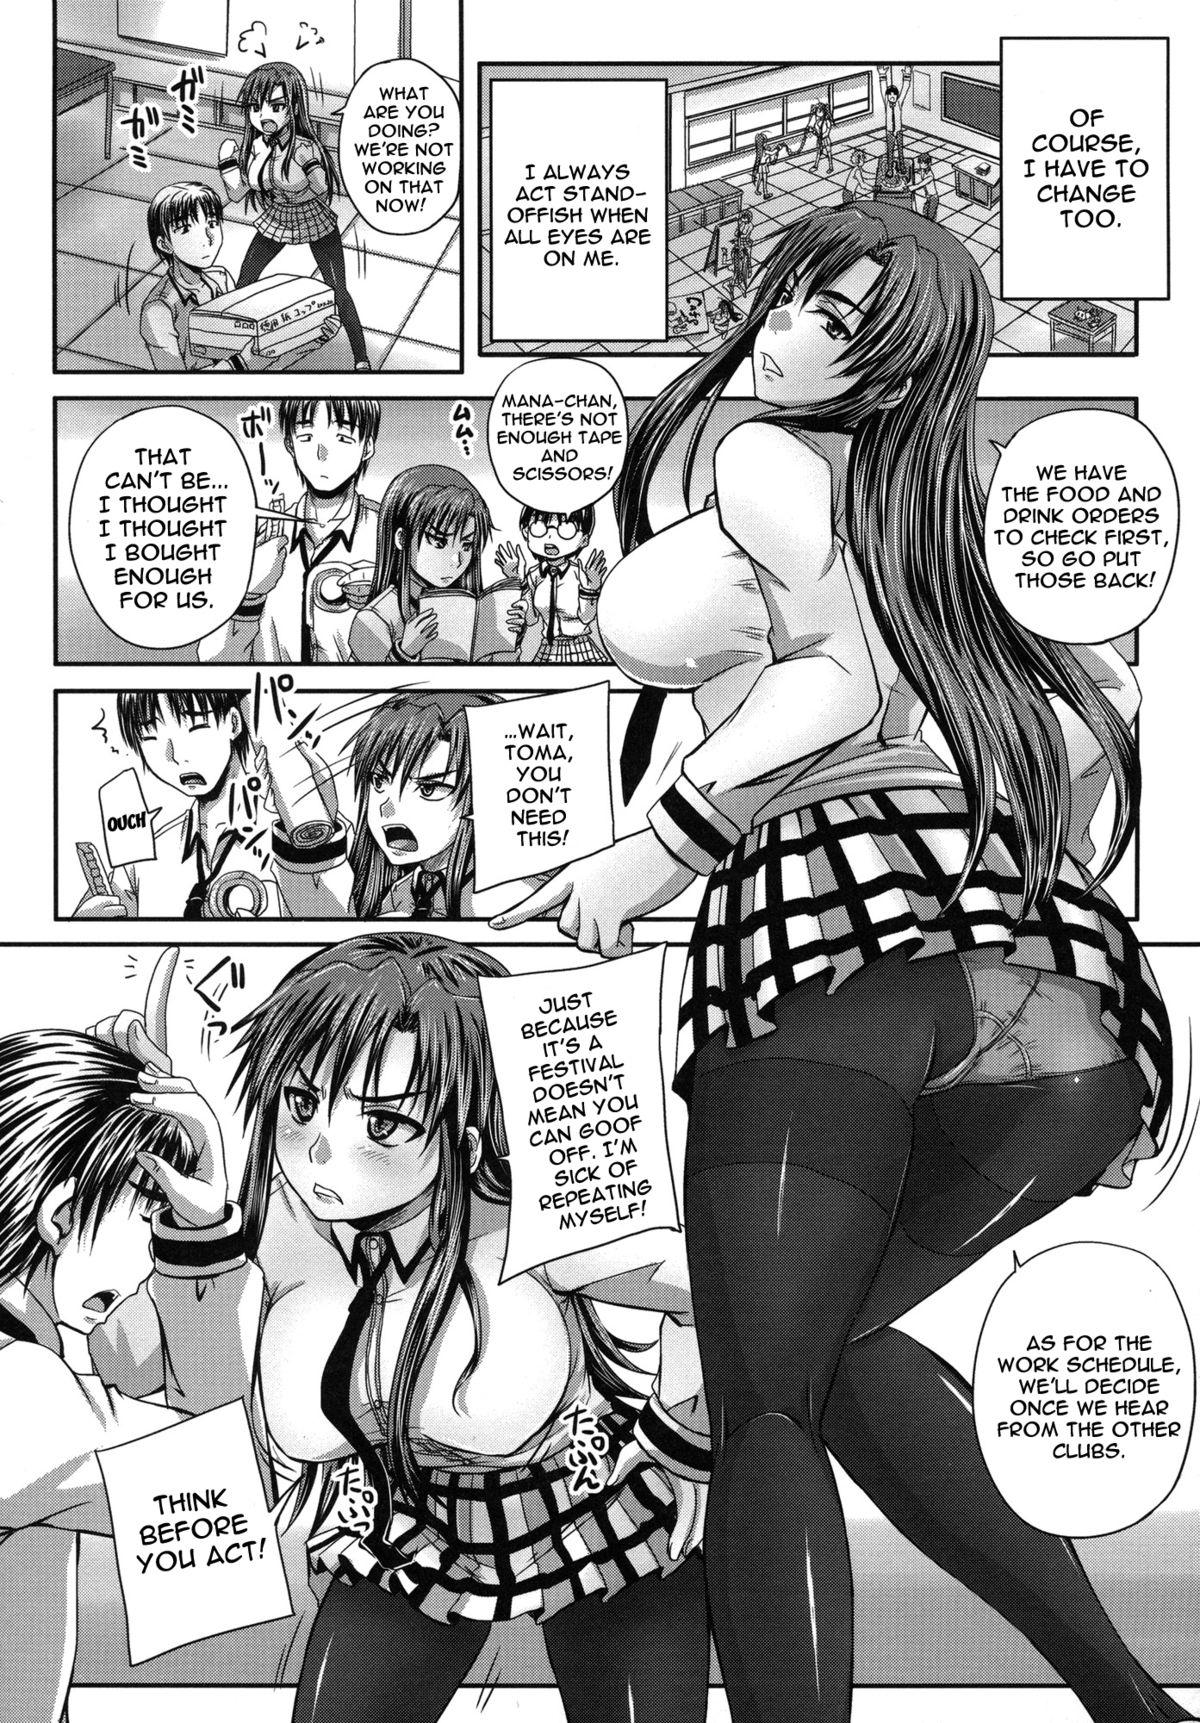 [Akigami Satoru] Tsukurou! Onaho Ane - Let's made a Sex Sleeve from Sister | Turning My Elder-Sister into a Sex-Sleeve [English] {doujin-moe.us} 9